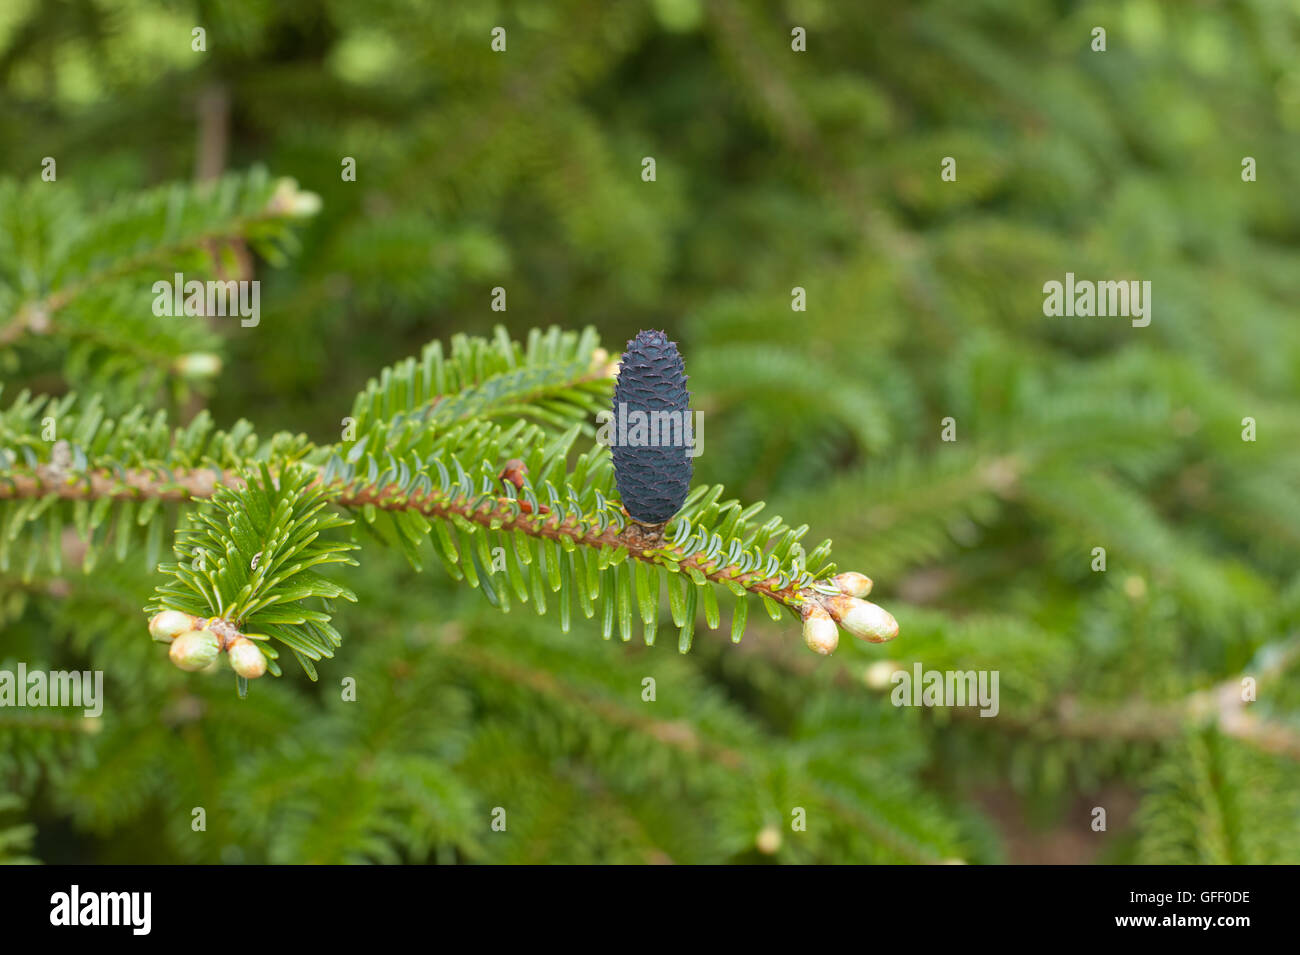 Pine Cone of Abies fargesii (Farges' Fir) on the Arboretum at Rosemoor in Devon, England, UK Stock Photo